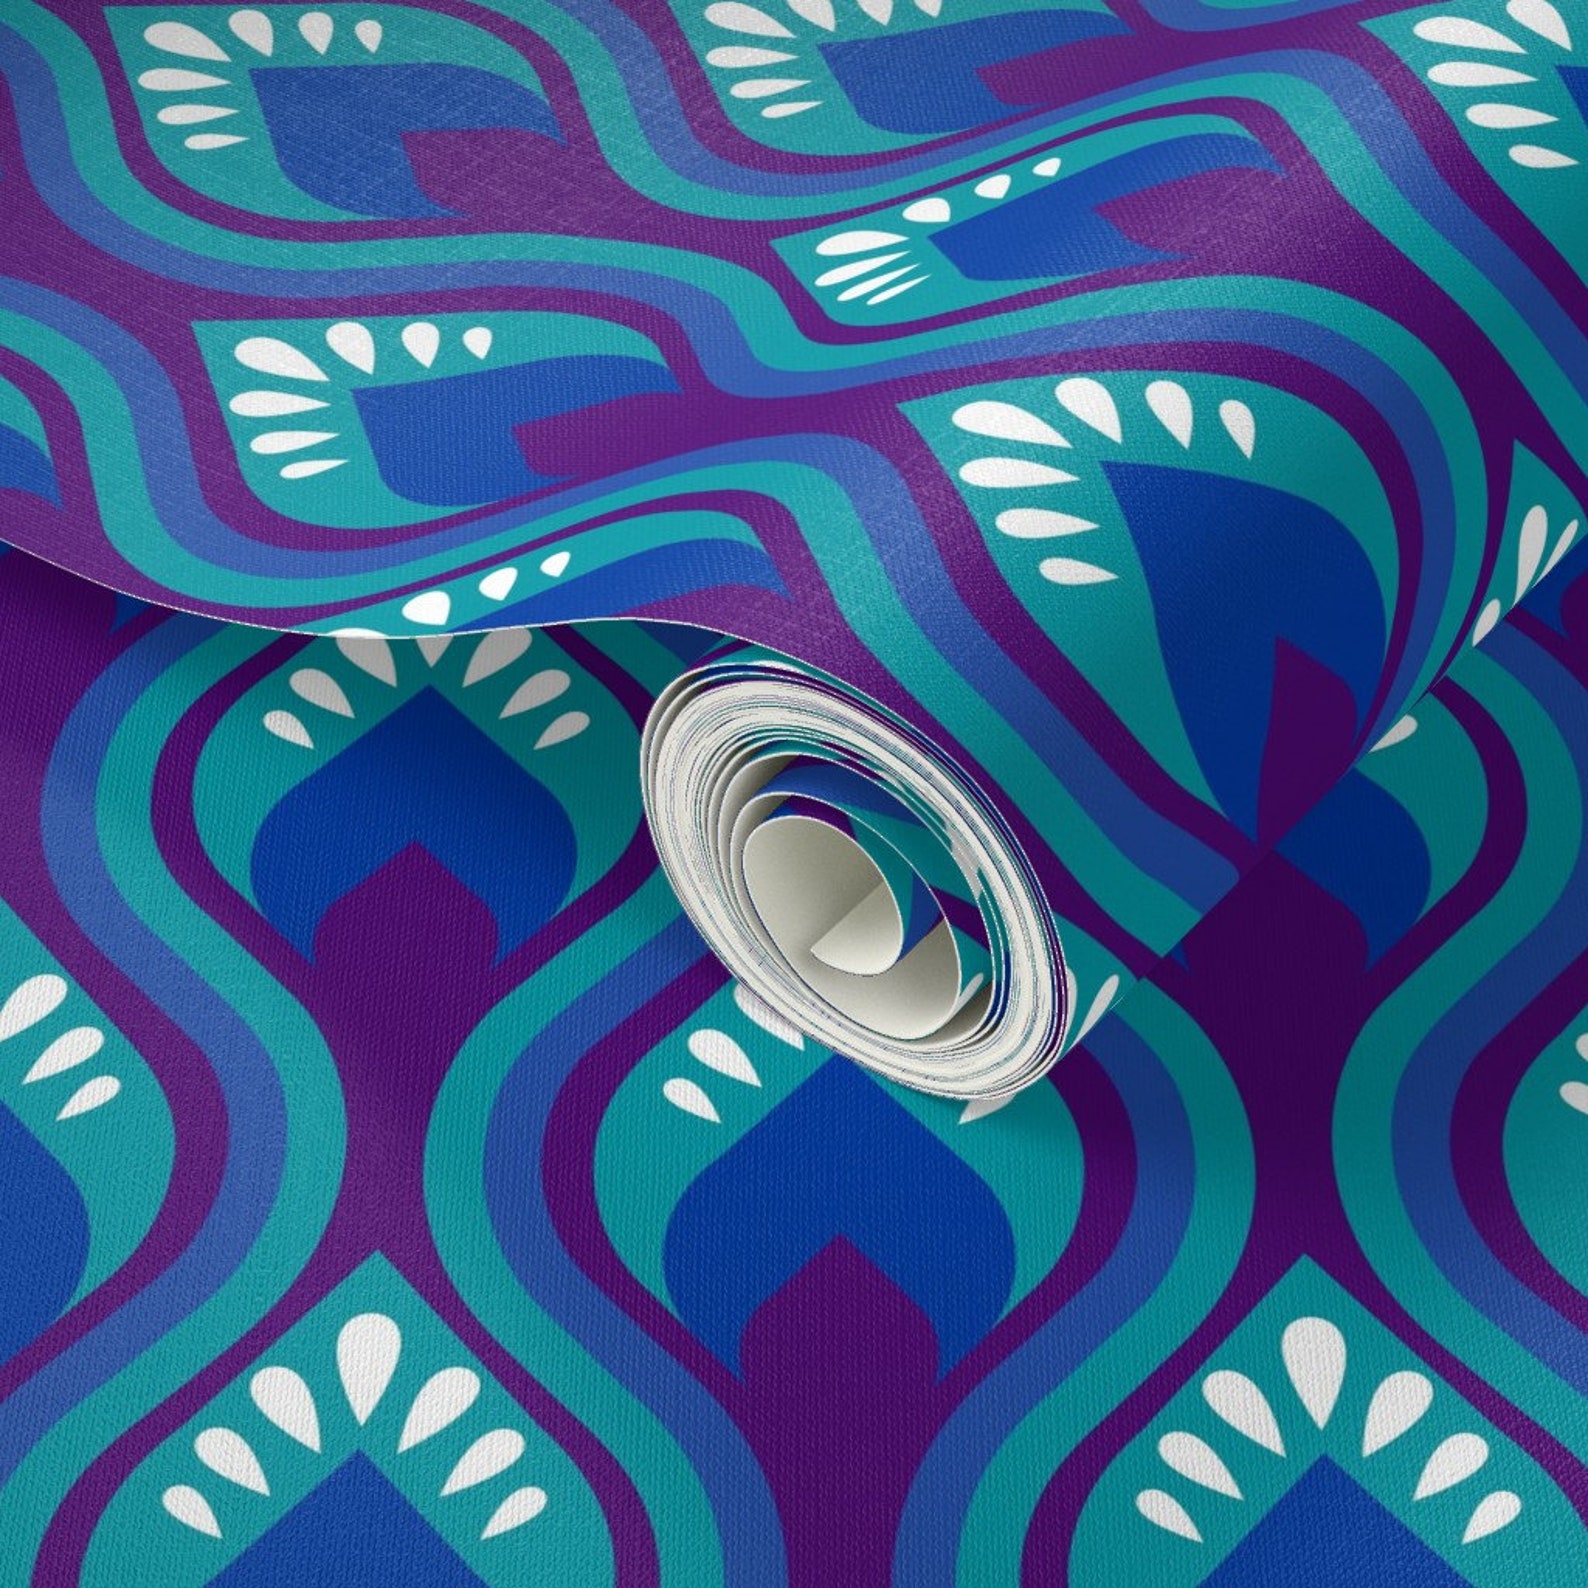 Moroccan Wallpaper Groovy Peacock by Lellobird Blue - Etsy